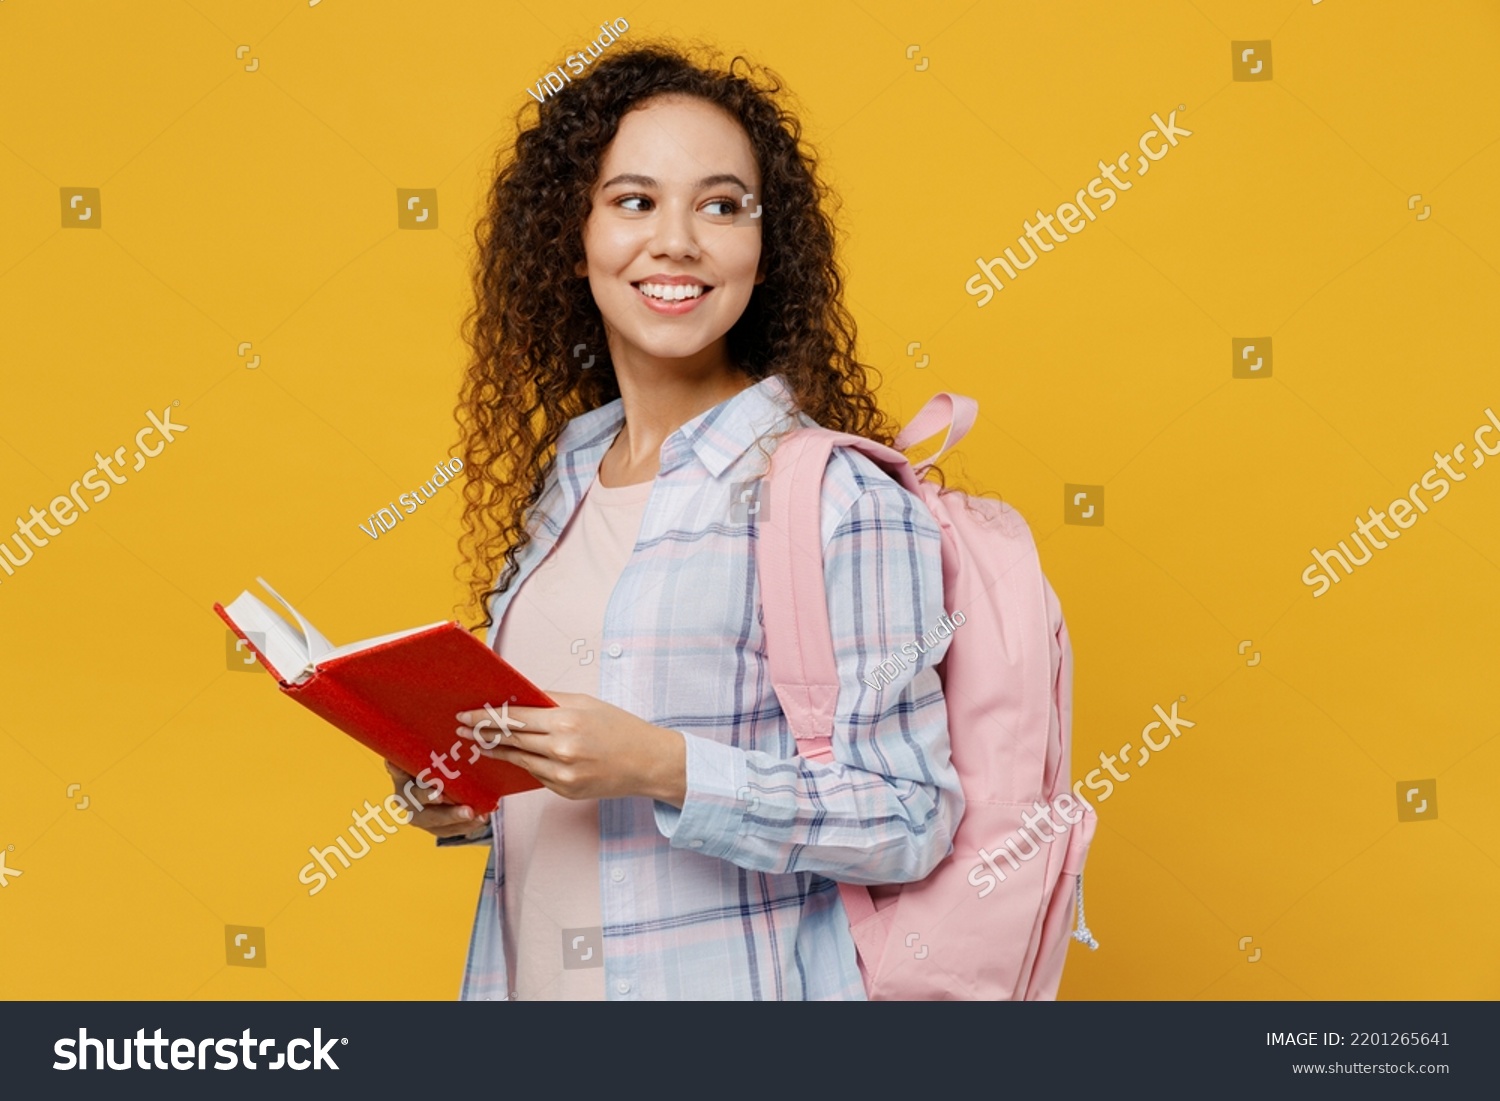 Side view young smiling happy black teen girl student she wear casual clothes backpack bag read book look aside on area isolated on plain yellow color background High school university college concept #2201265641